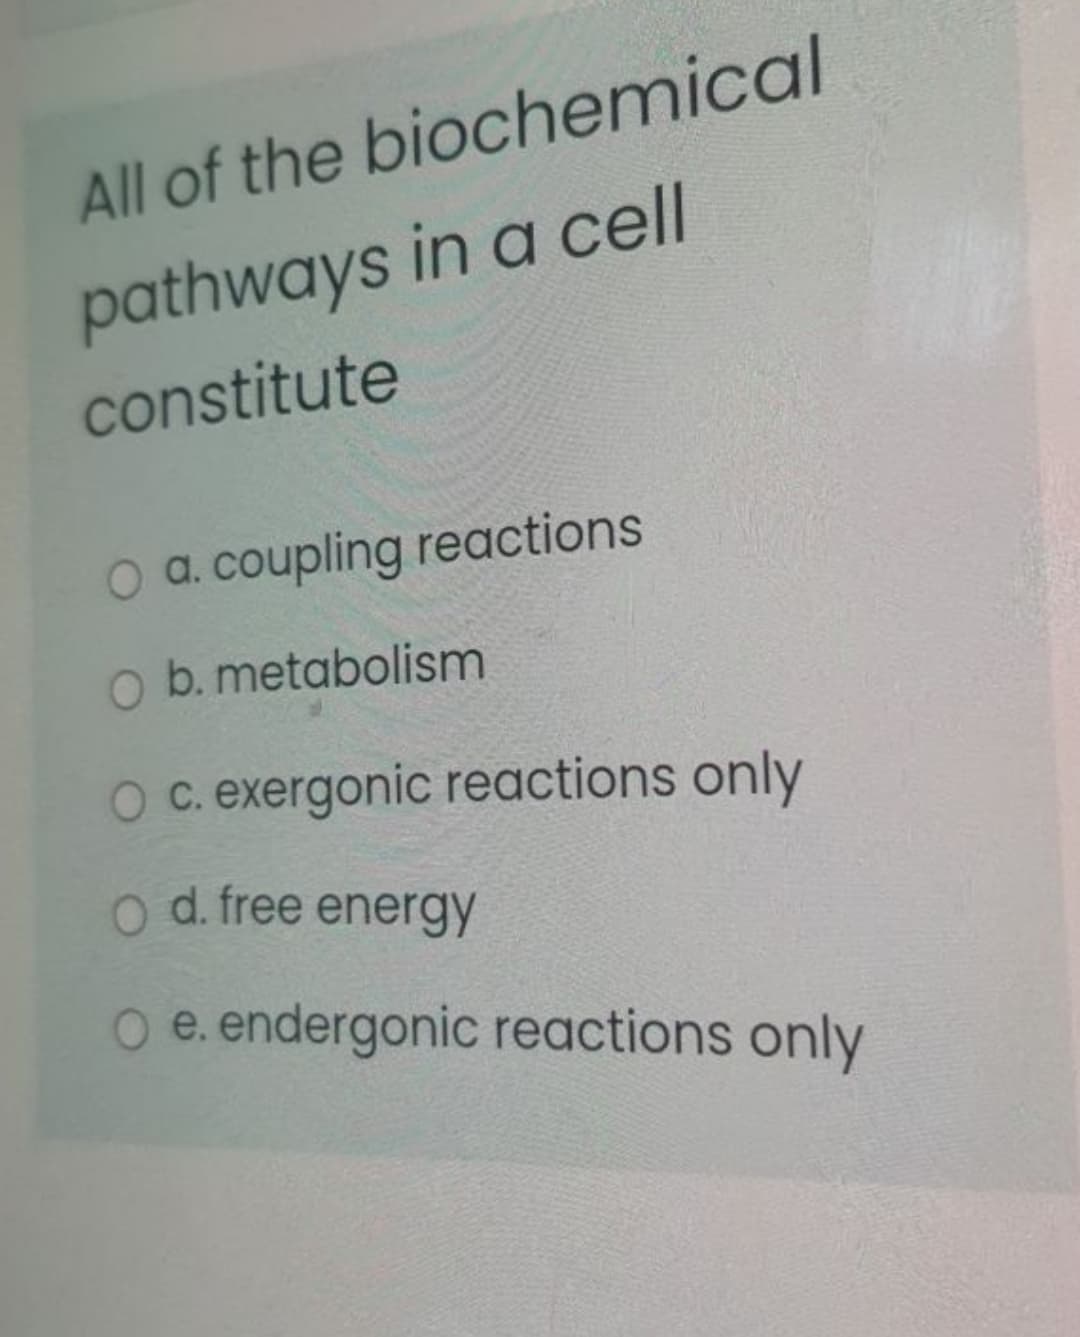 All of the biochemical
pathways in a cell
constitute
O a. coupling reactions
O b. metabolism
c. exergonic reactions only
o d. free energy
O e. endergonic reactions only
